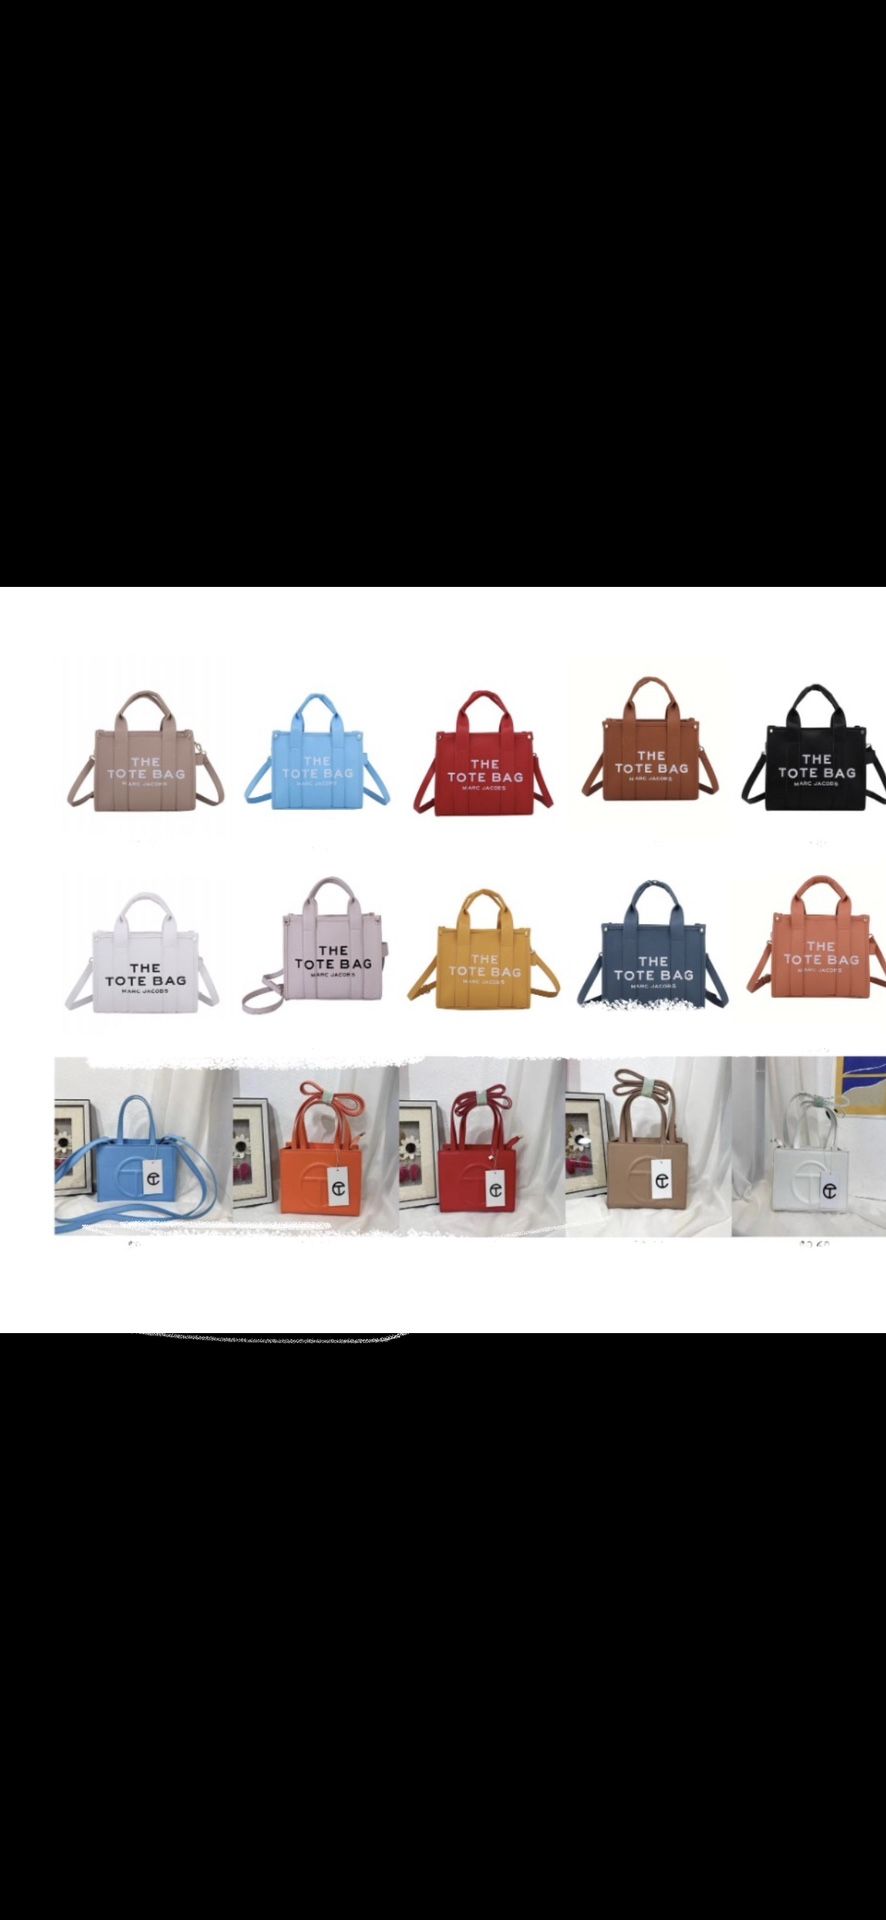 Tote Bags: Marc Jacobs